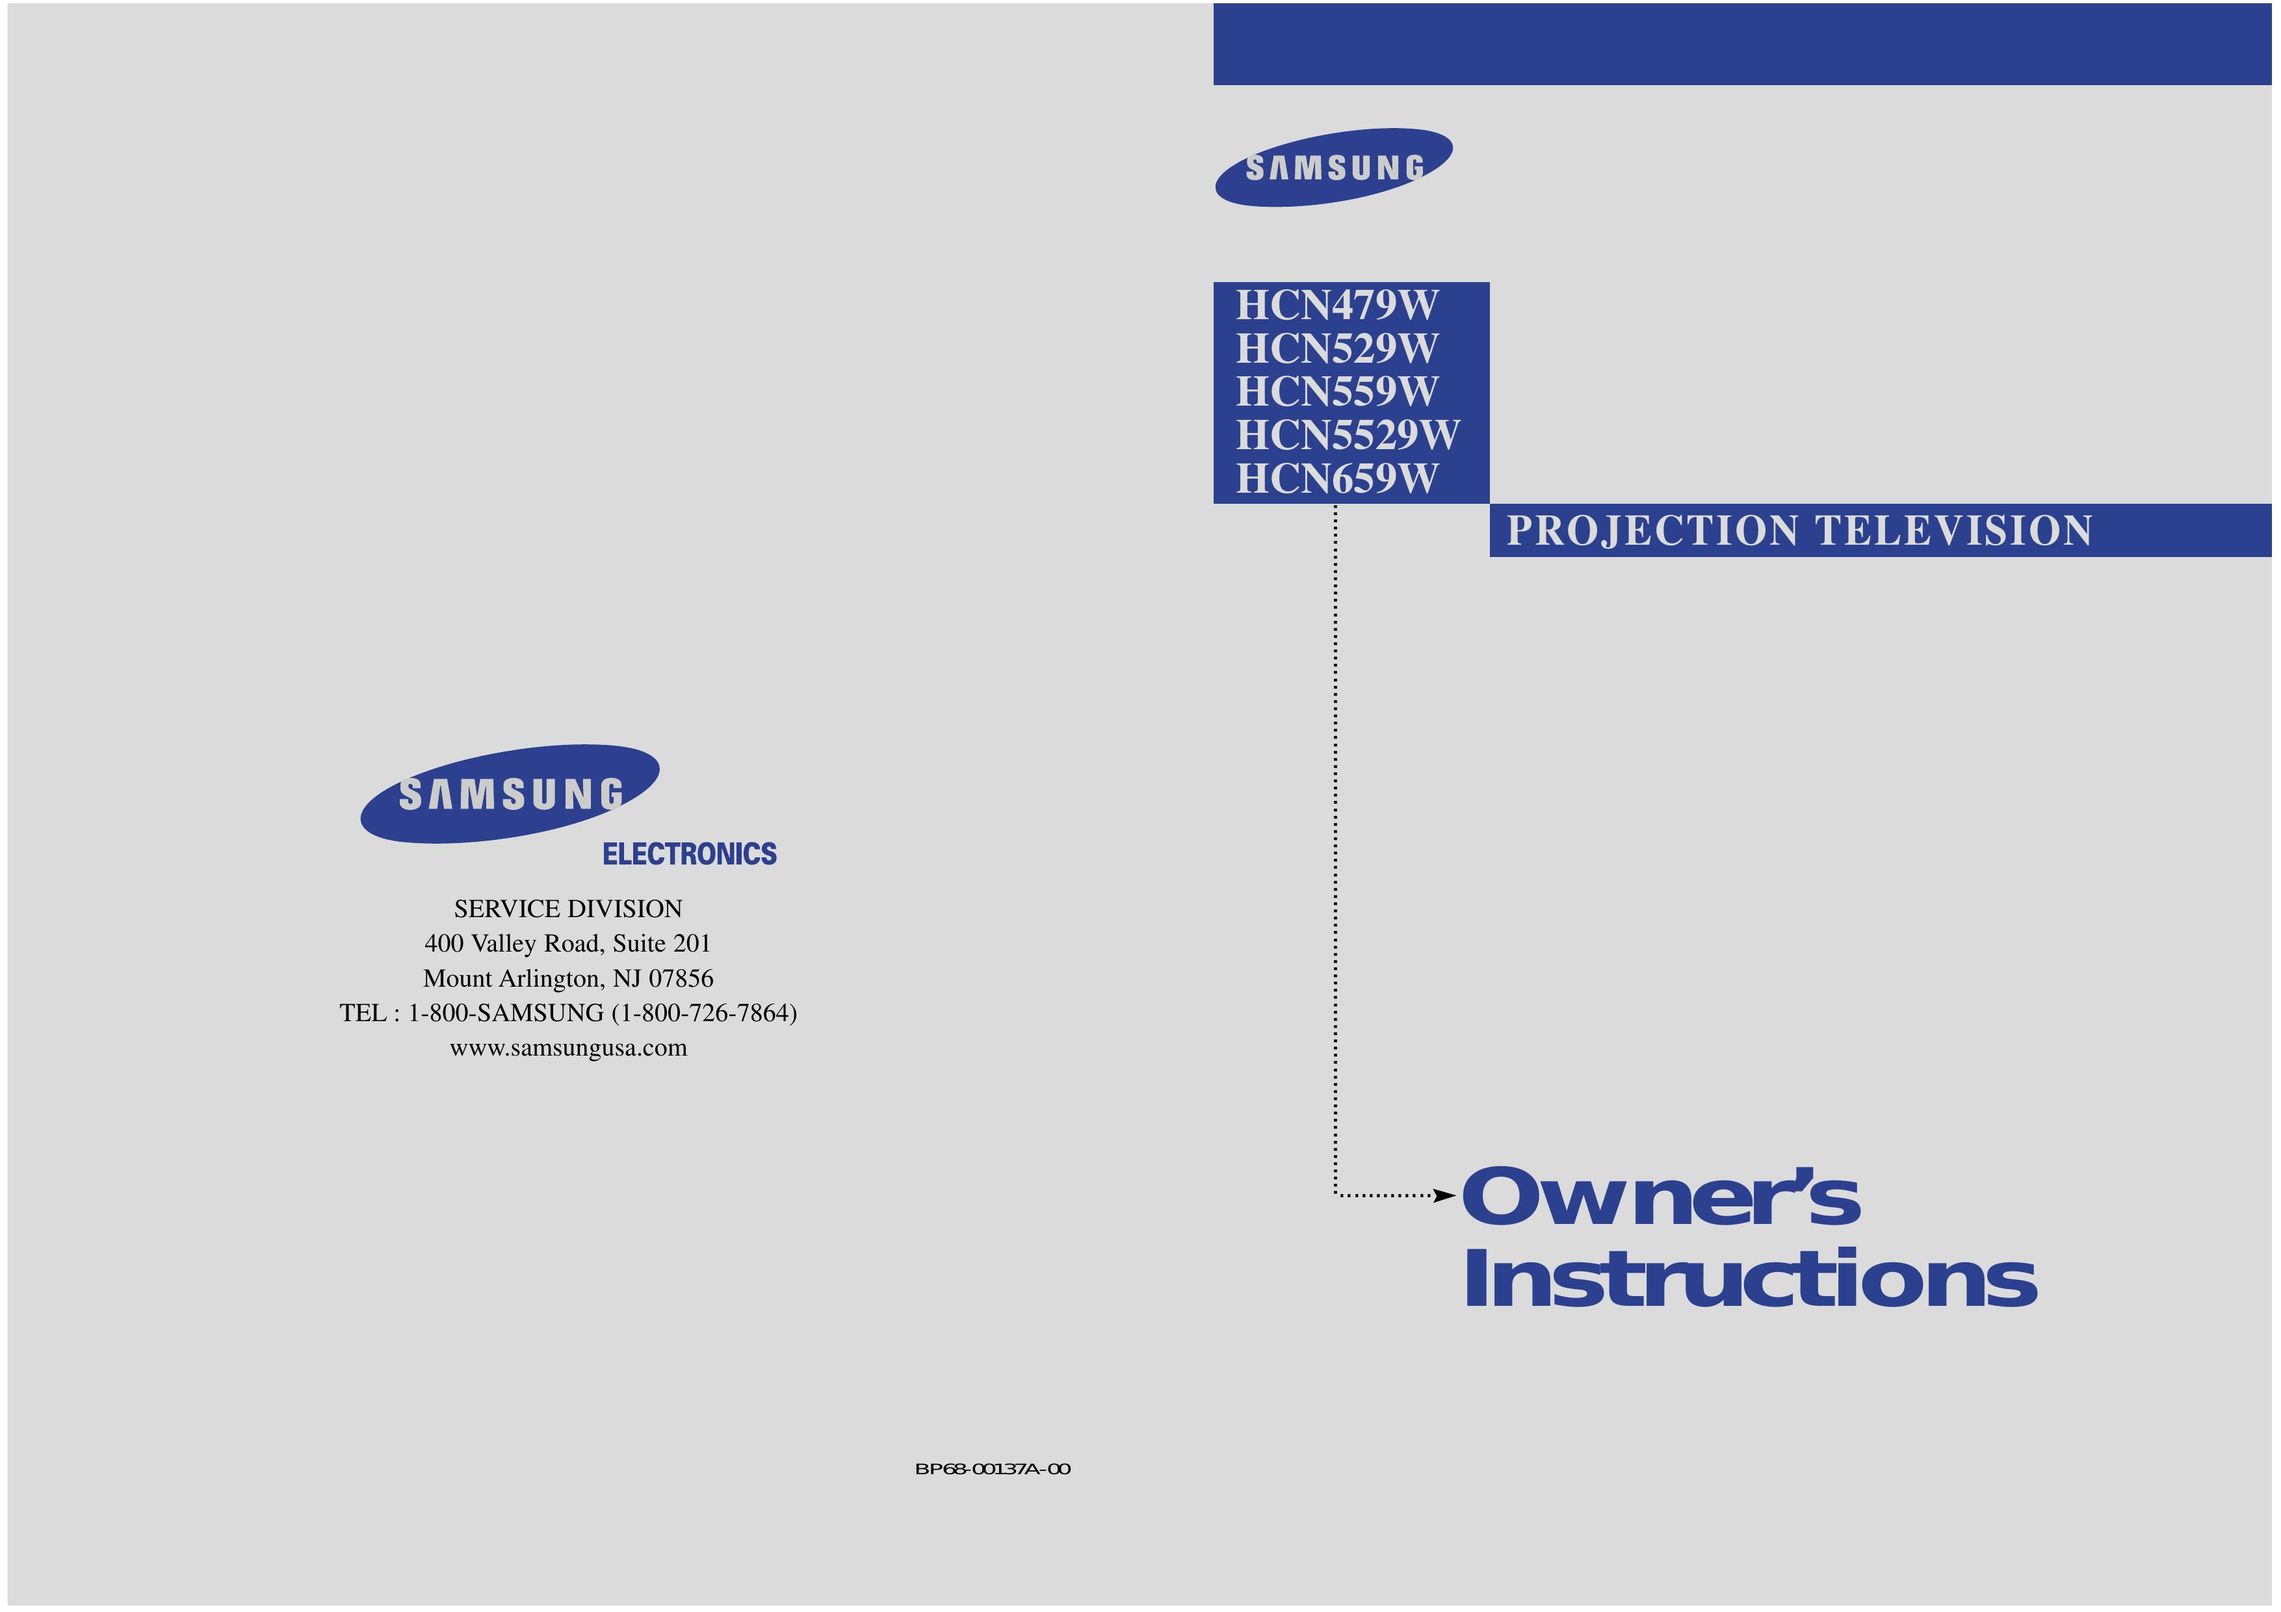 Samsung HCN529W Projection Television User Manual